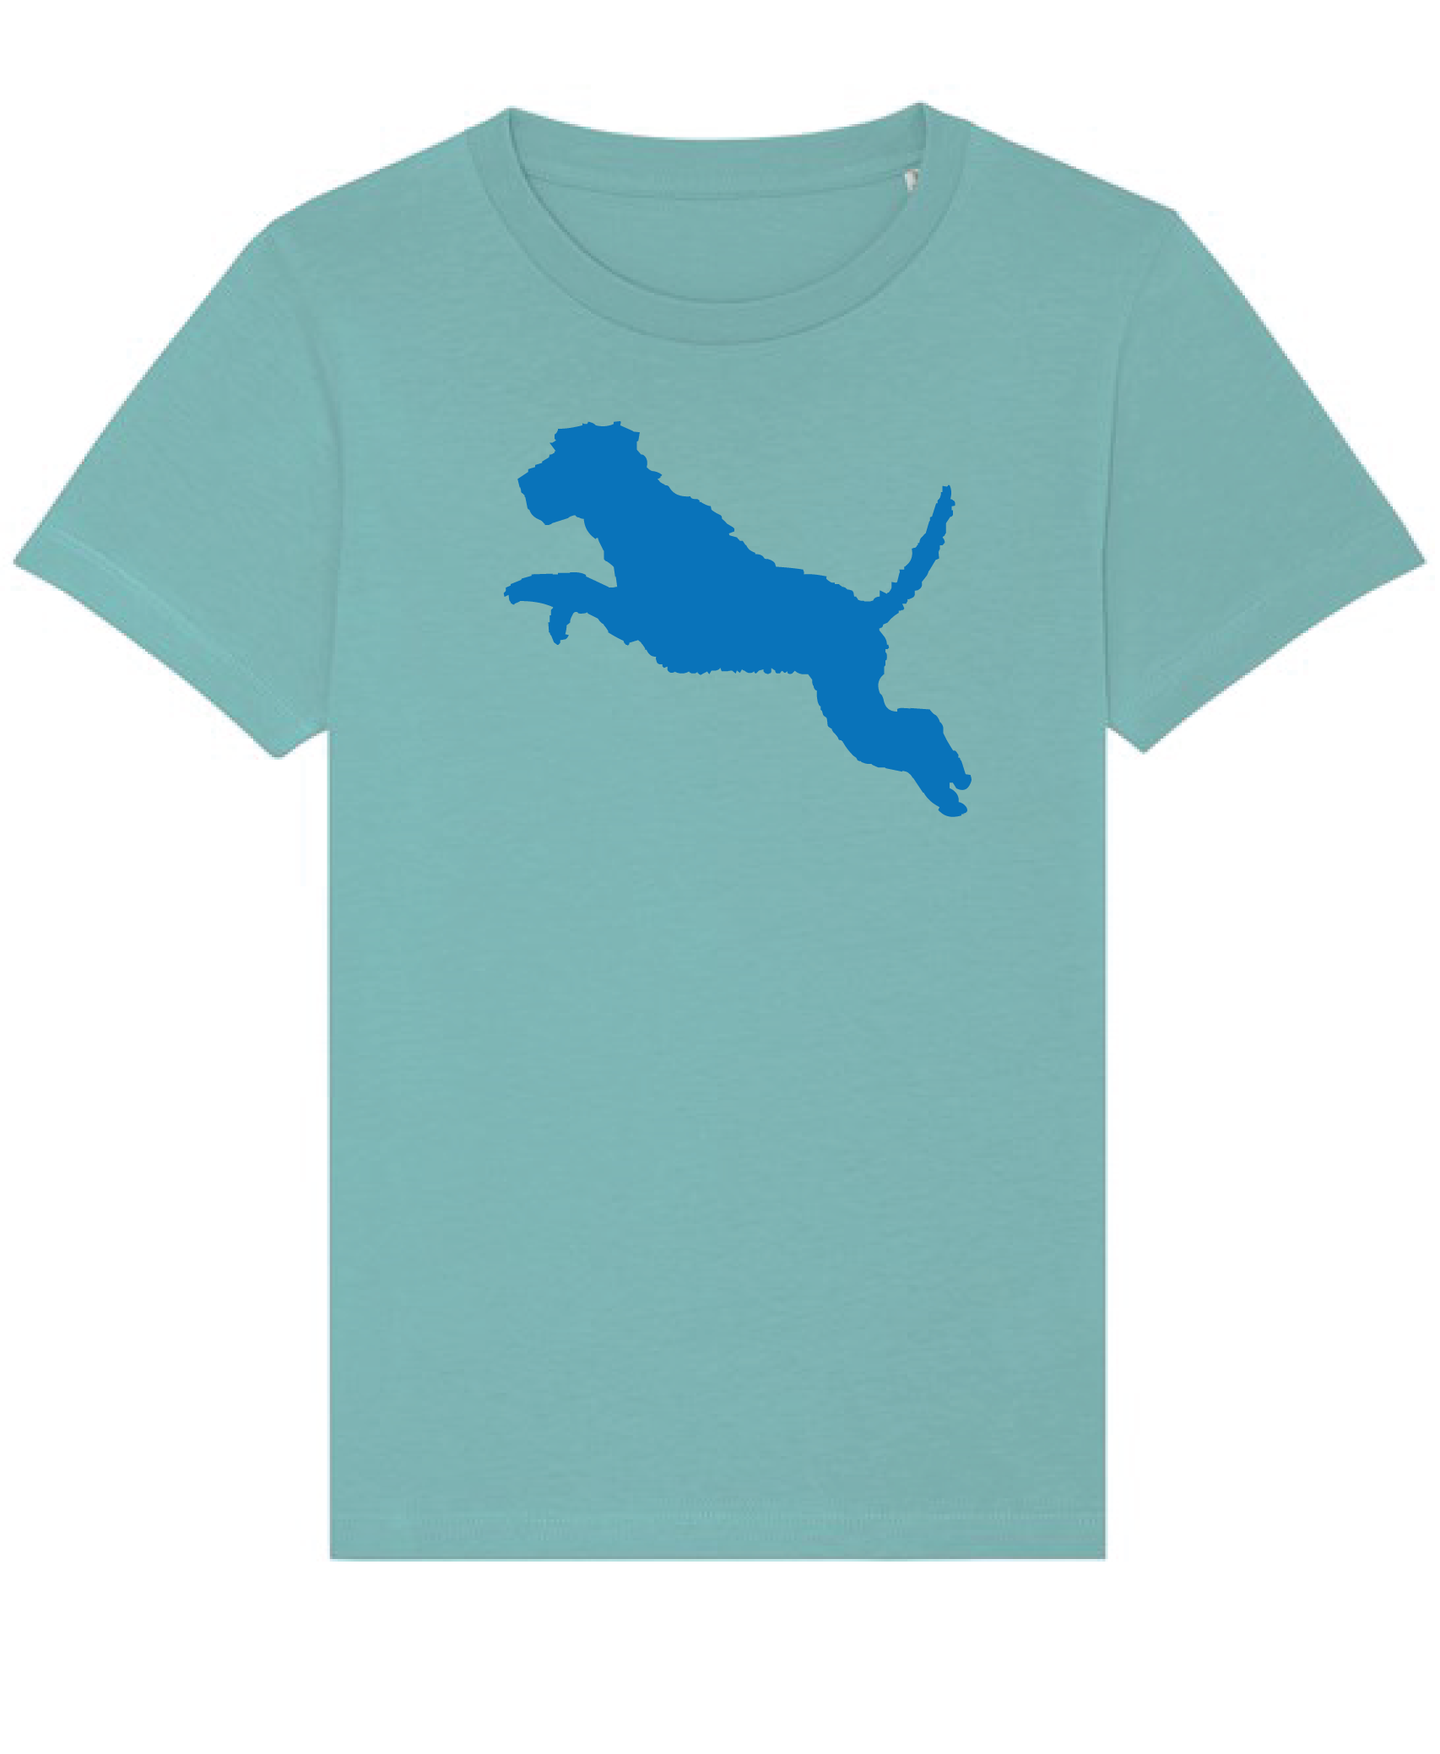 Boys New Teal Organic tee shirt with Wolfhound flock print.